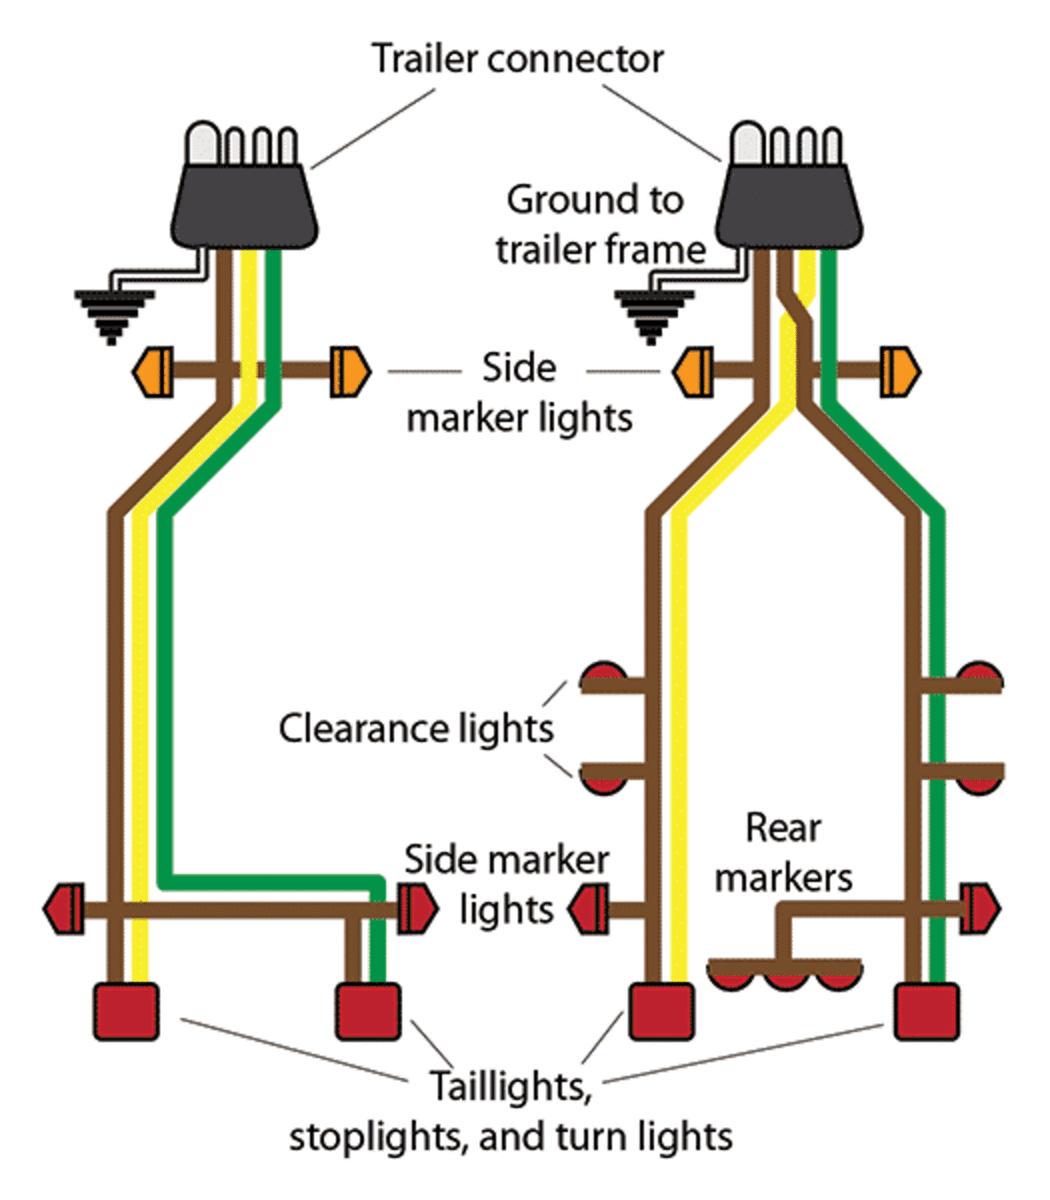 Tips for Installing 4-Pin Trailer Wiring - AxleAddict  4 Wire Trailer Wiring Harness Diagram Splice Kit    AxleAddict